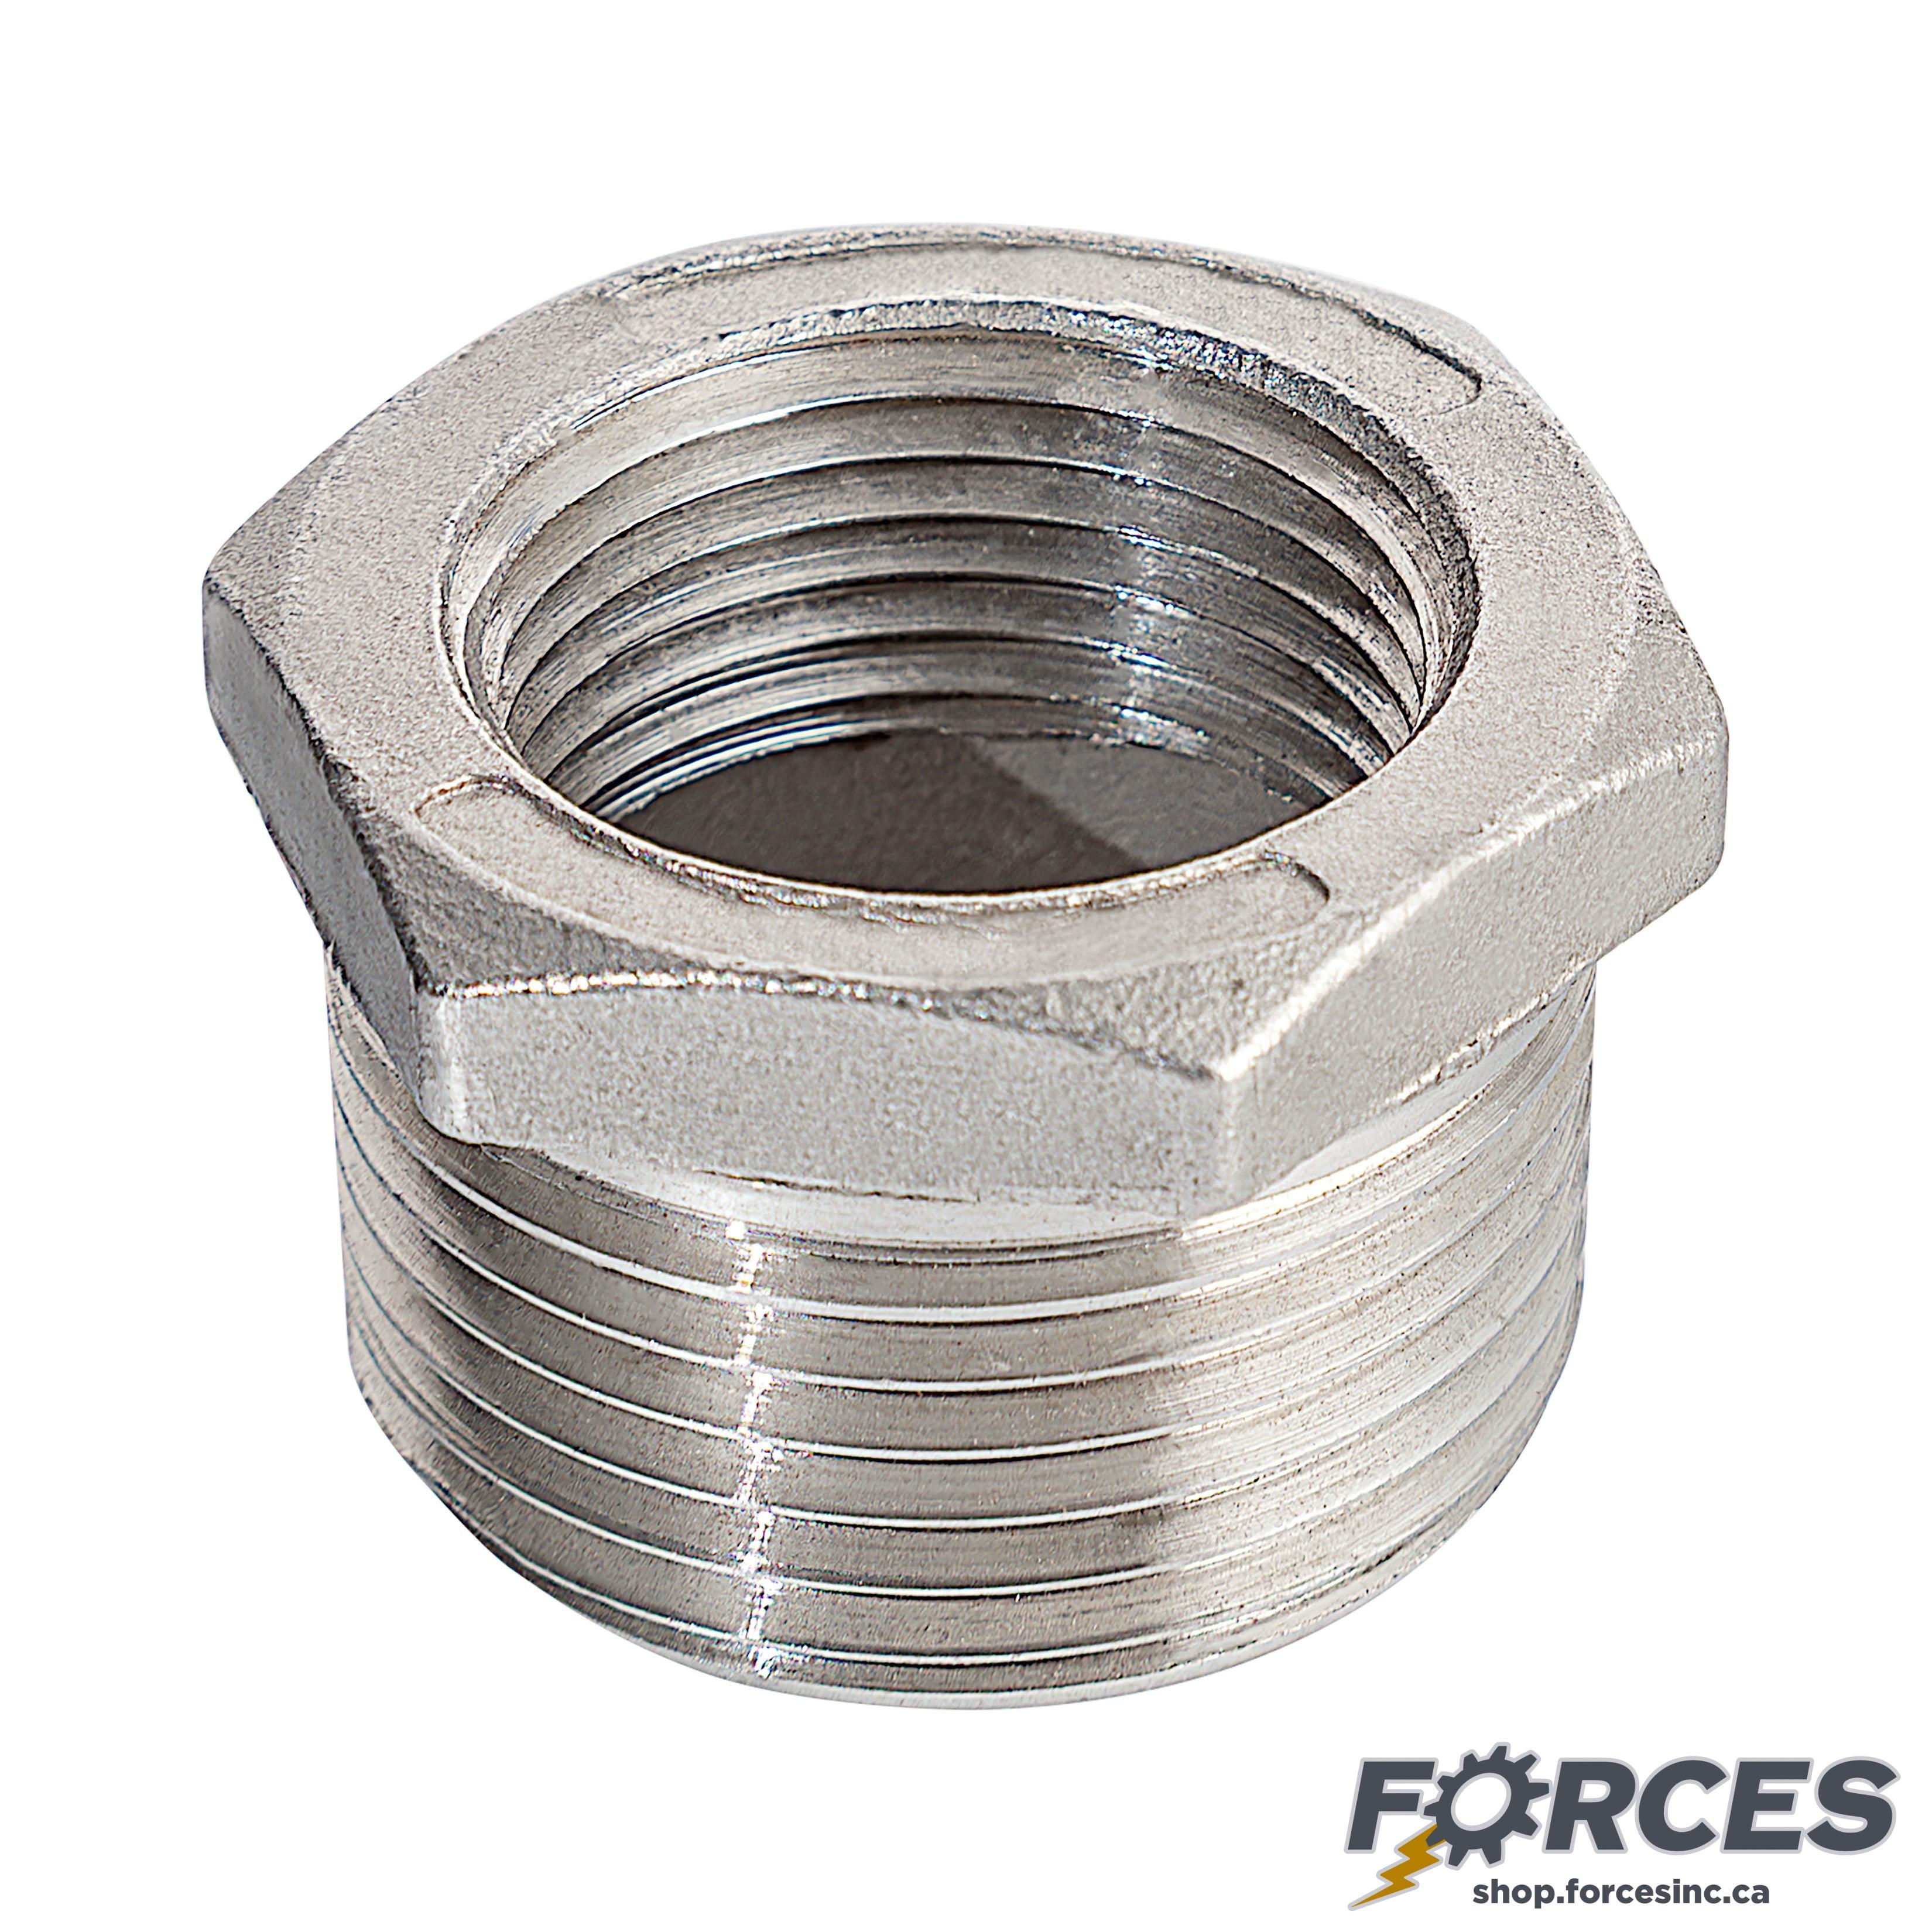 2-1/2" (M) x 1-1/2" (F) Reducing Hex Bushing NPT #150 - Stainless Steel 316 - Forces Inc